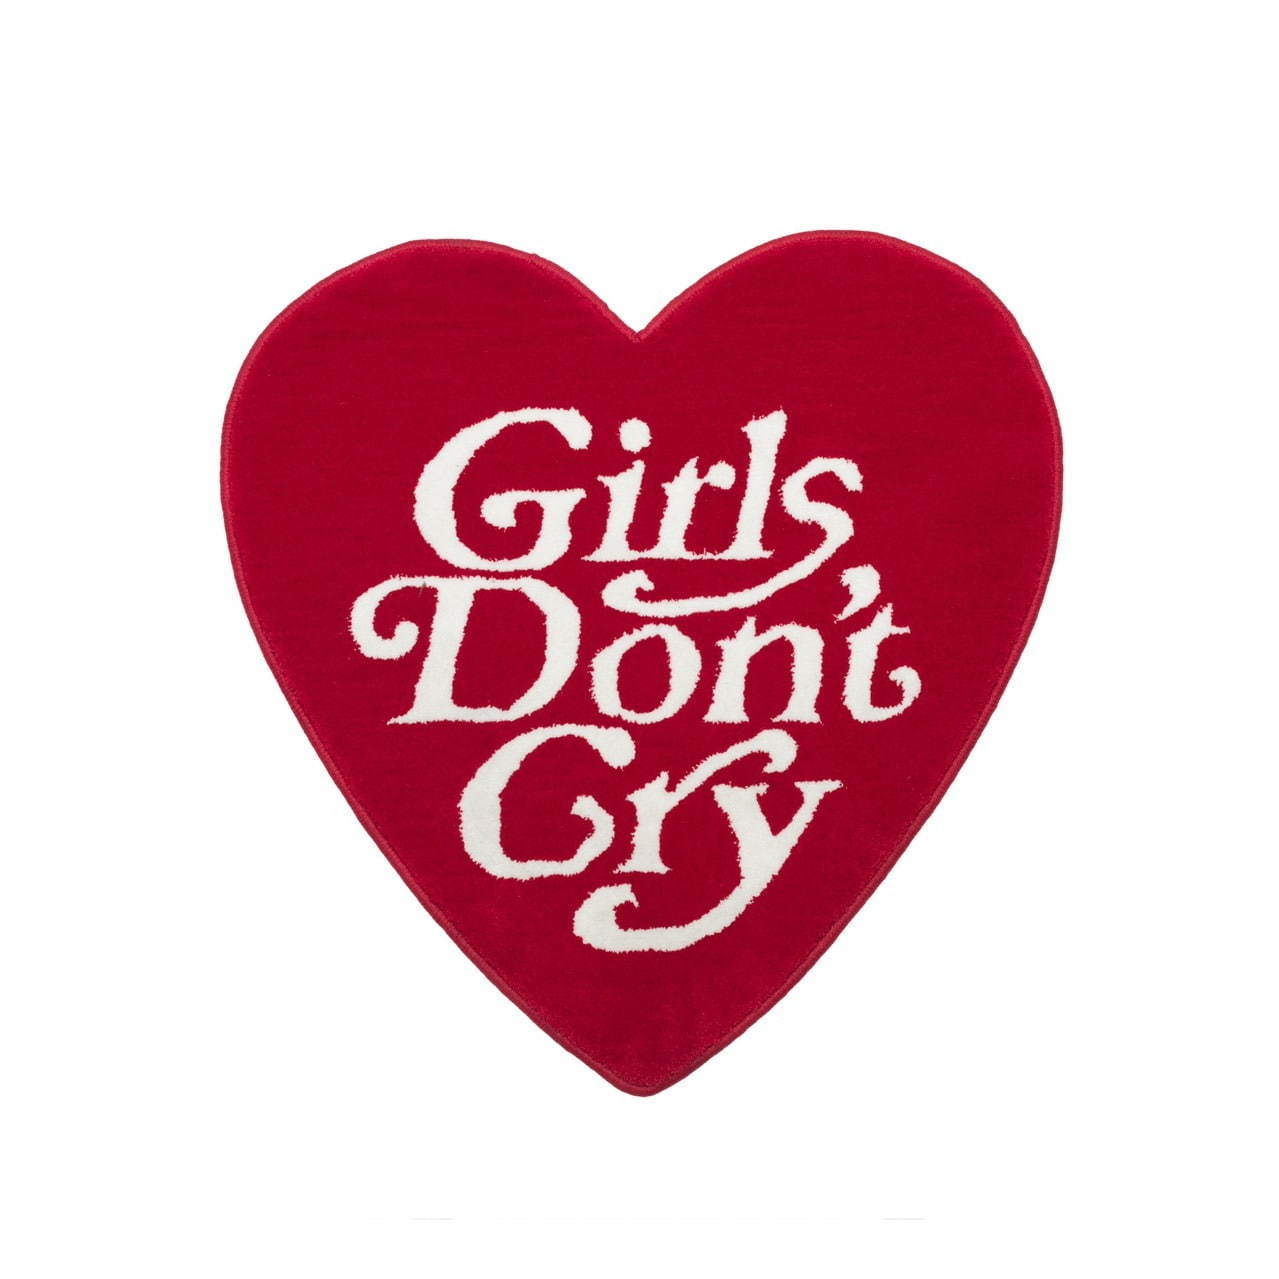 verdy Girls Don't cry